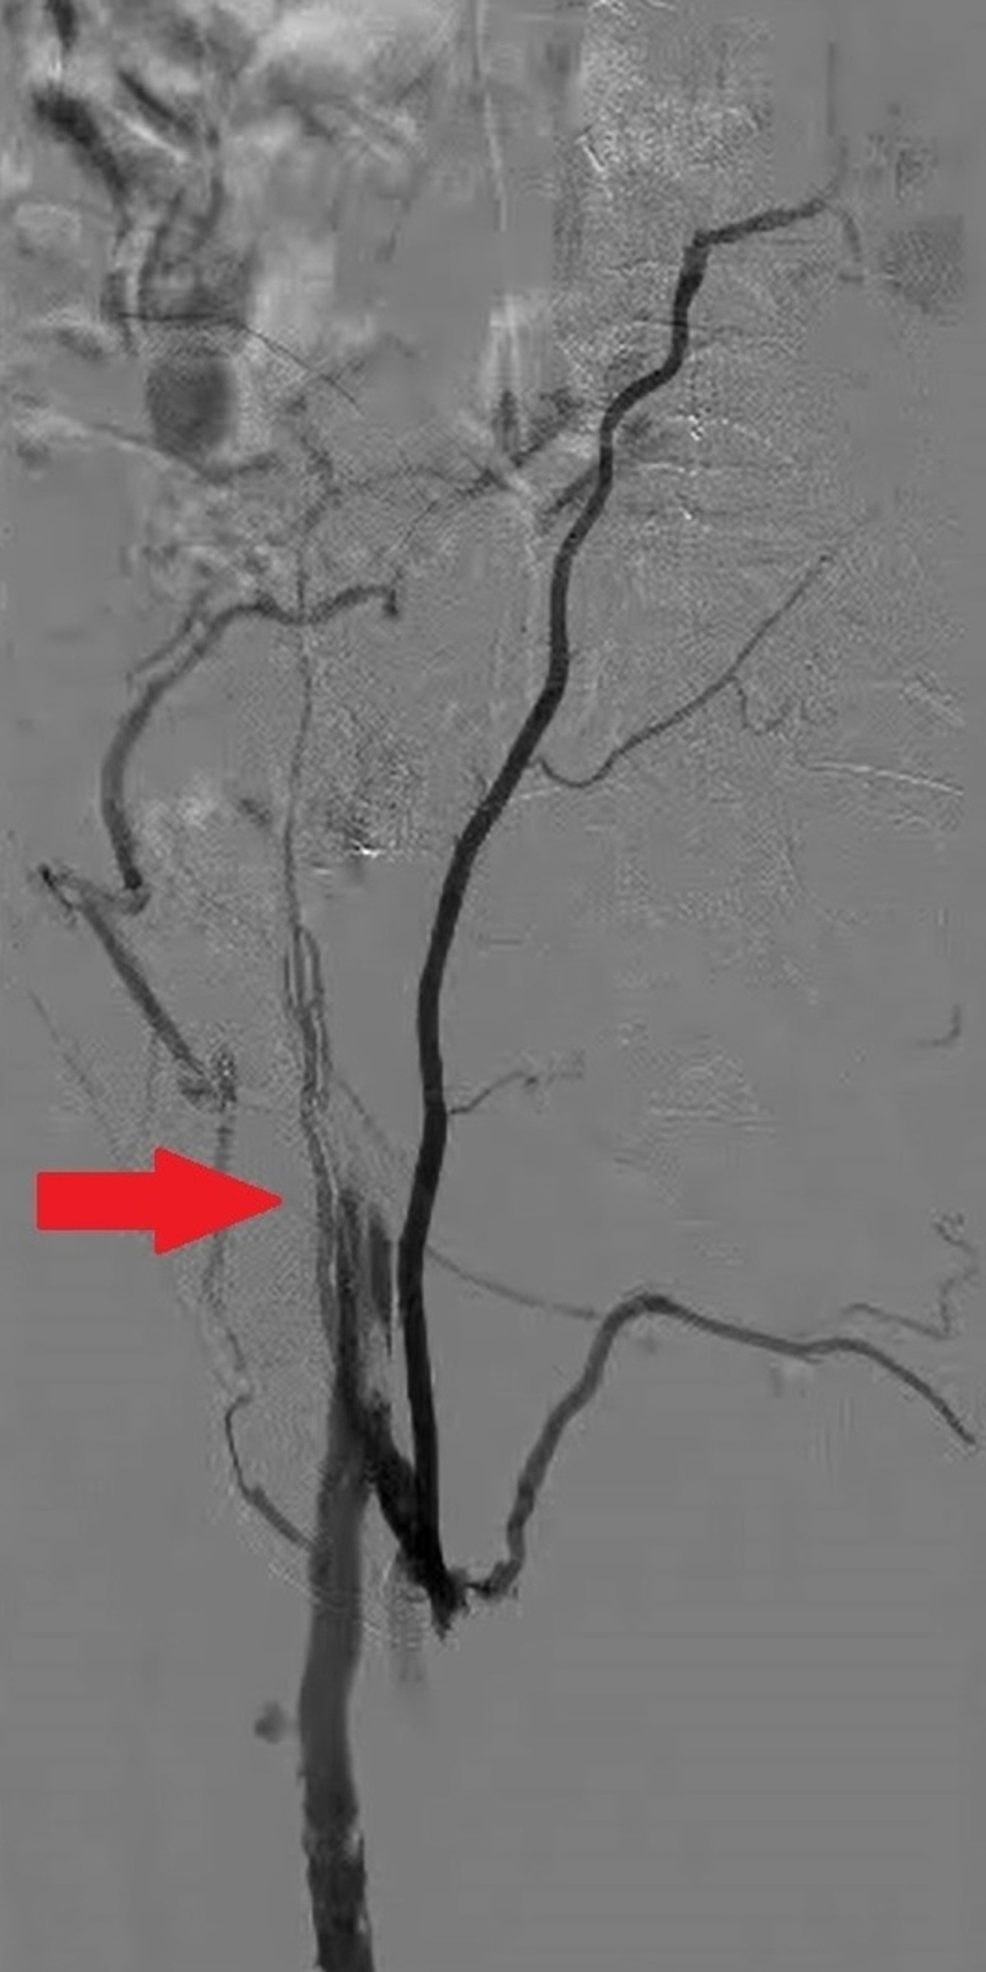 A-venogram-of-the-left-lower-extremity-with-abrupt-cessation-of-blood-flow-(red-arrow)-beyond-the-common-iliac-vein-with-extensive-collateral-formation